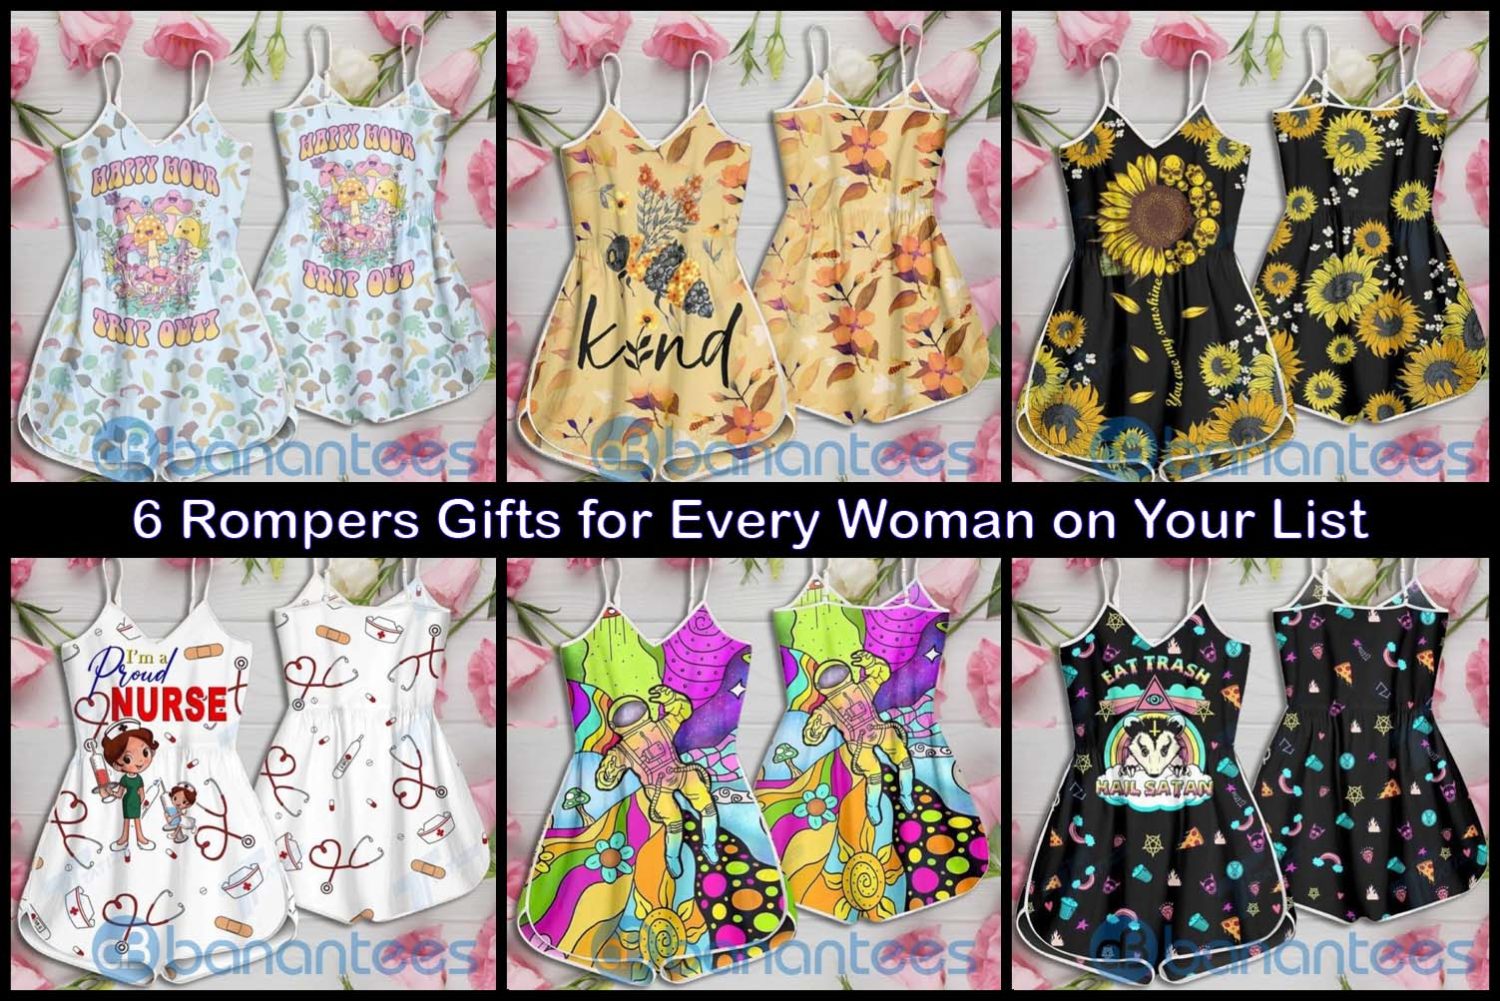 6 Rompers Gifts for Every Woman on Your List